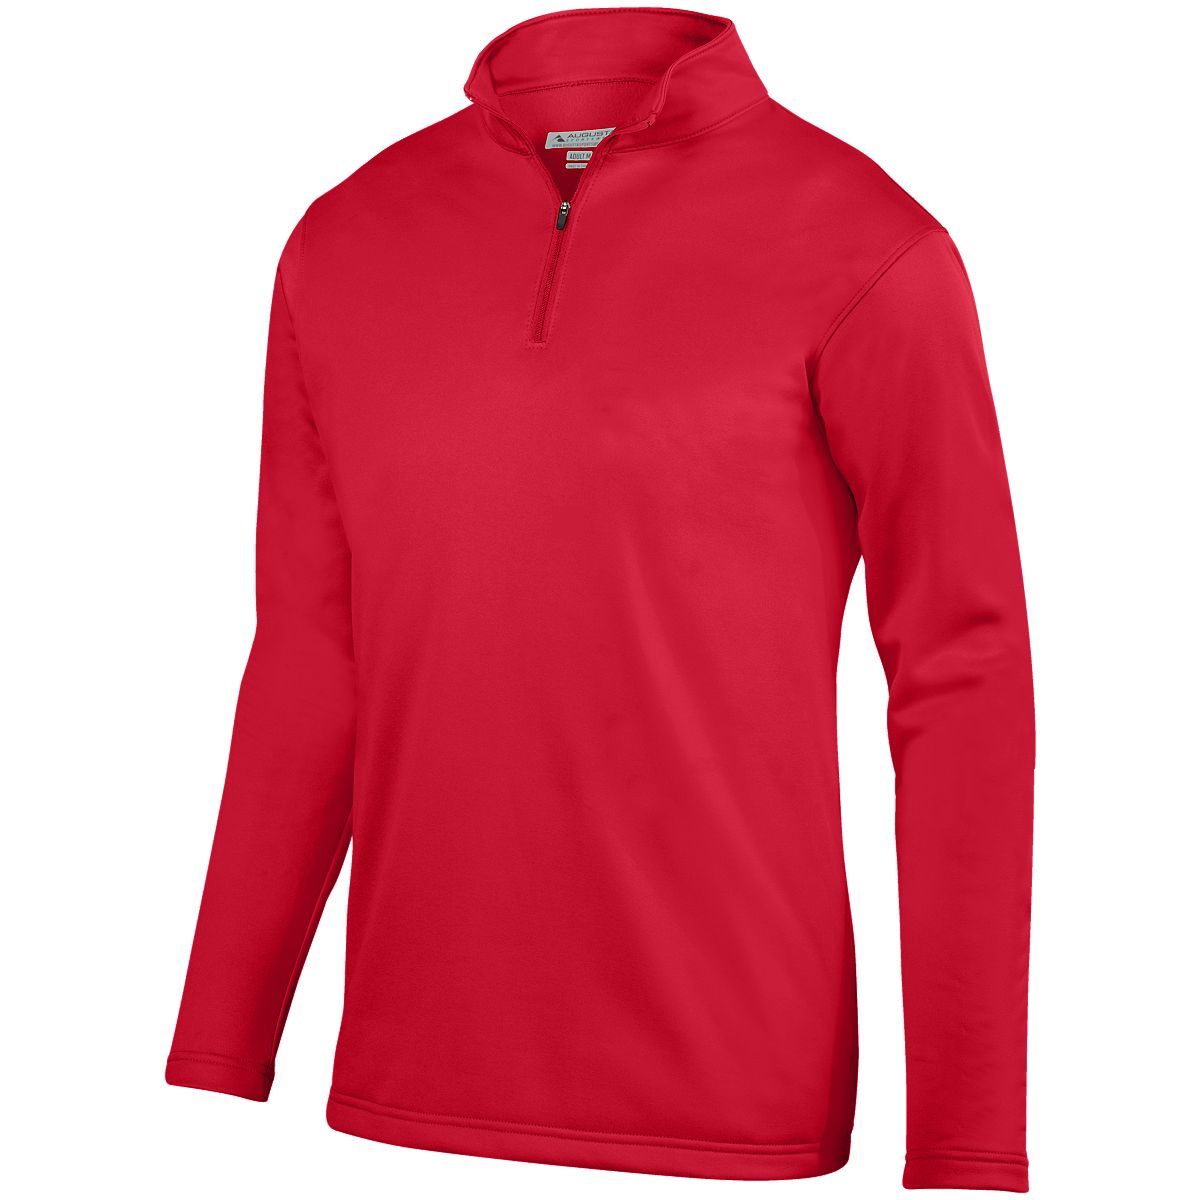 Augusta Sportswear Youth Wicking Fleece Pullover in Red  -Part of the Youth, Youth-Pullover, Augusta-Products, Outerwear product lines at KanaleyCreations.com